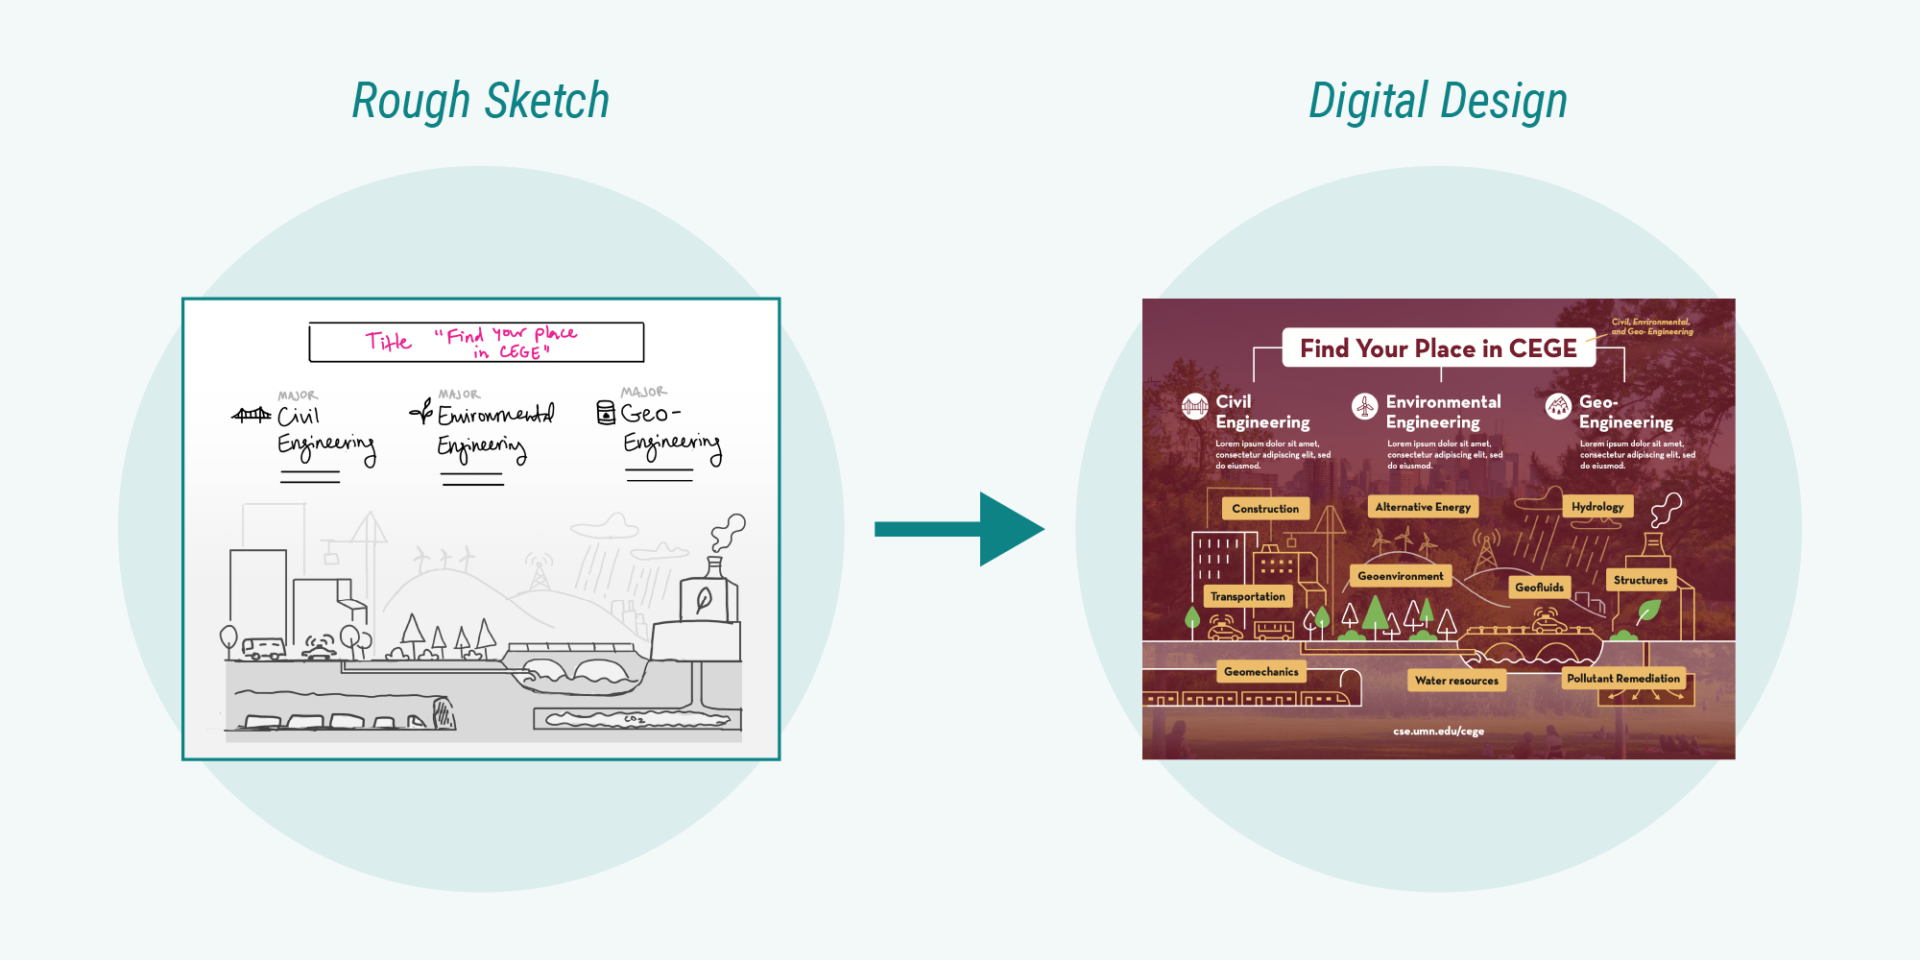 Graphic showing a rough sketch turning into a digital design with full color and illustration